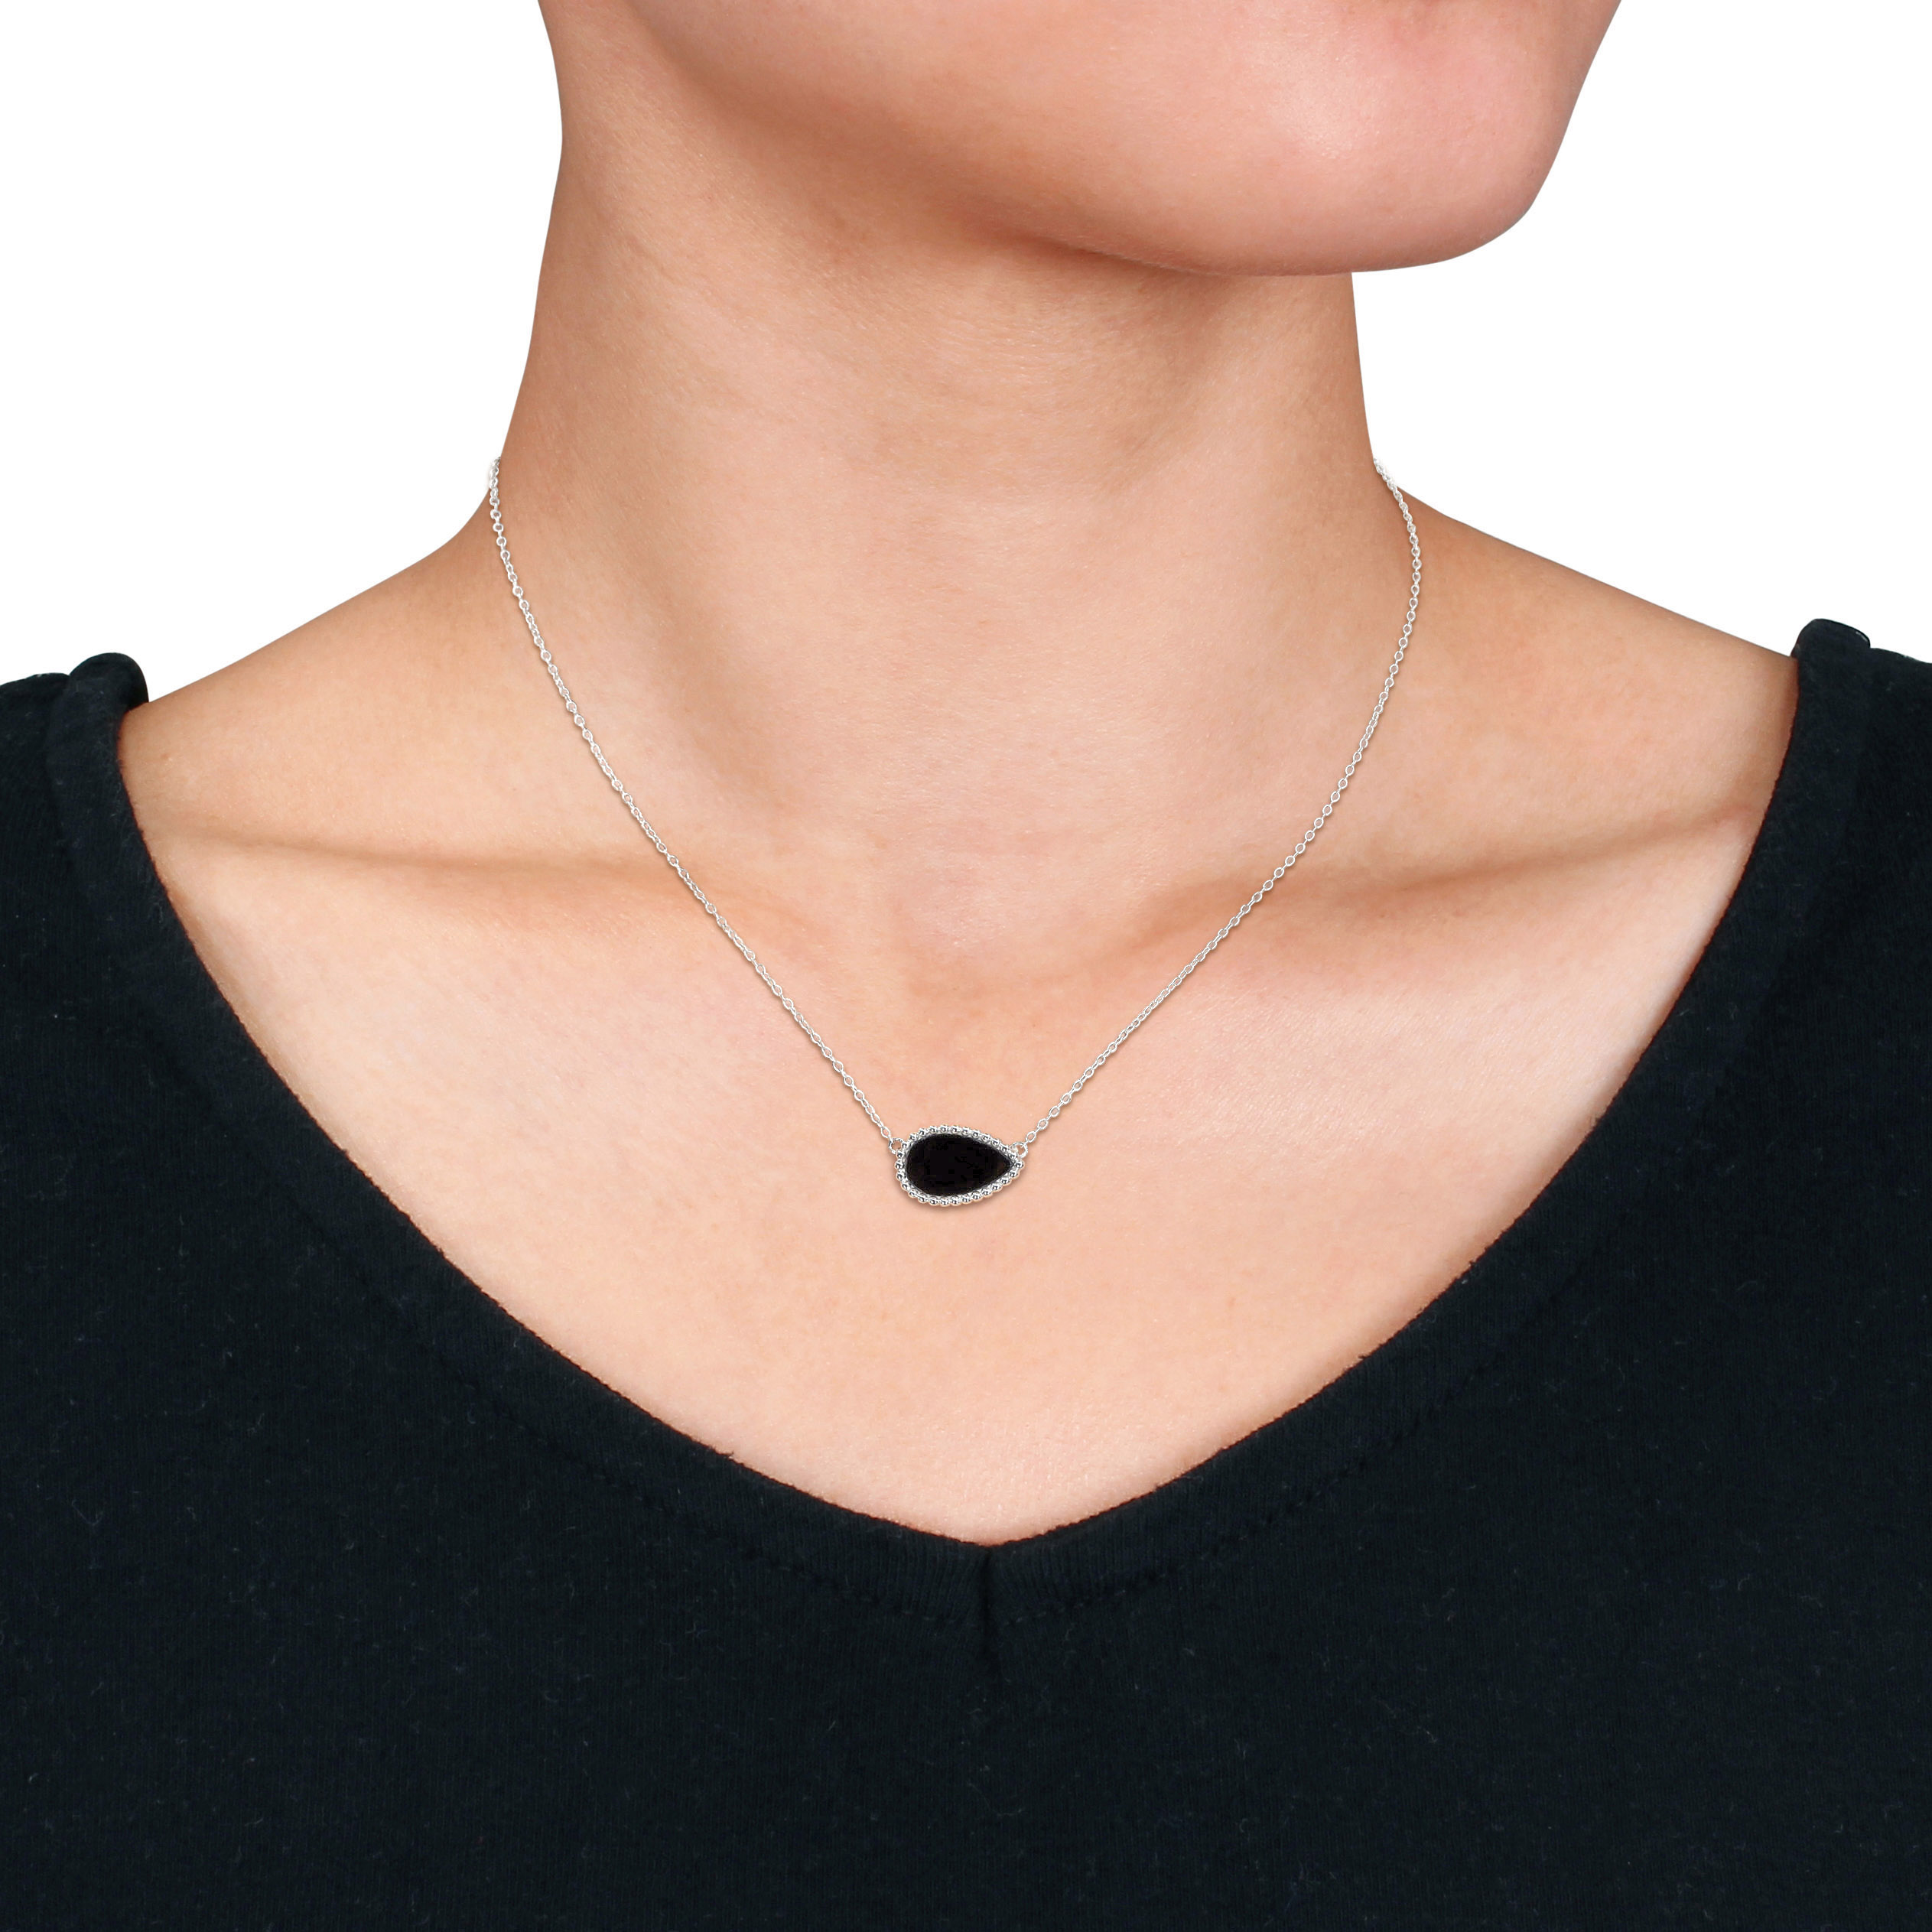 4 CT TGW Pear Shape Black Agate Necklace With Beaded Halo in Sterling Silver - 17 in.